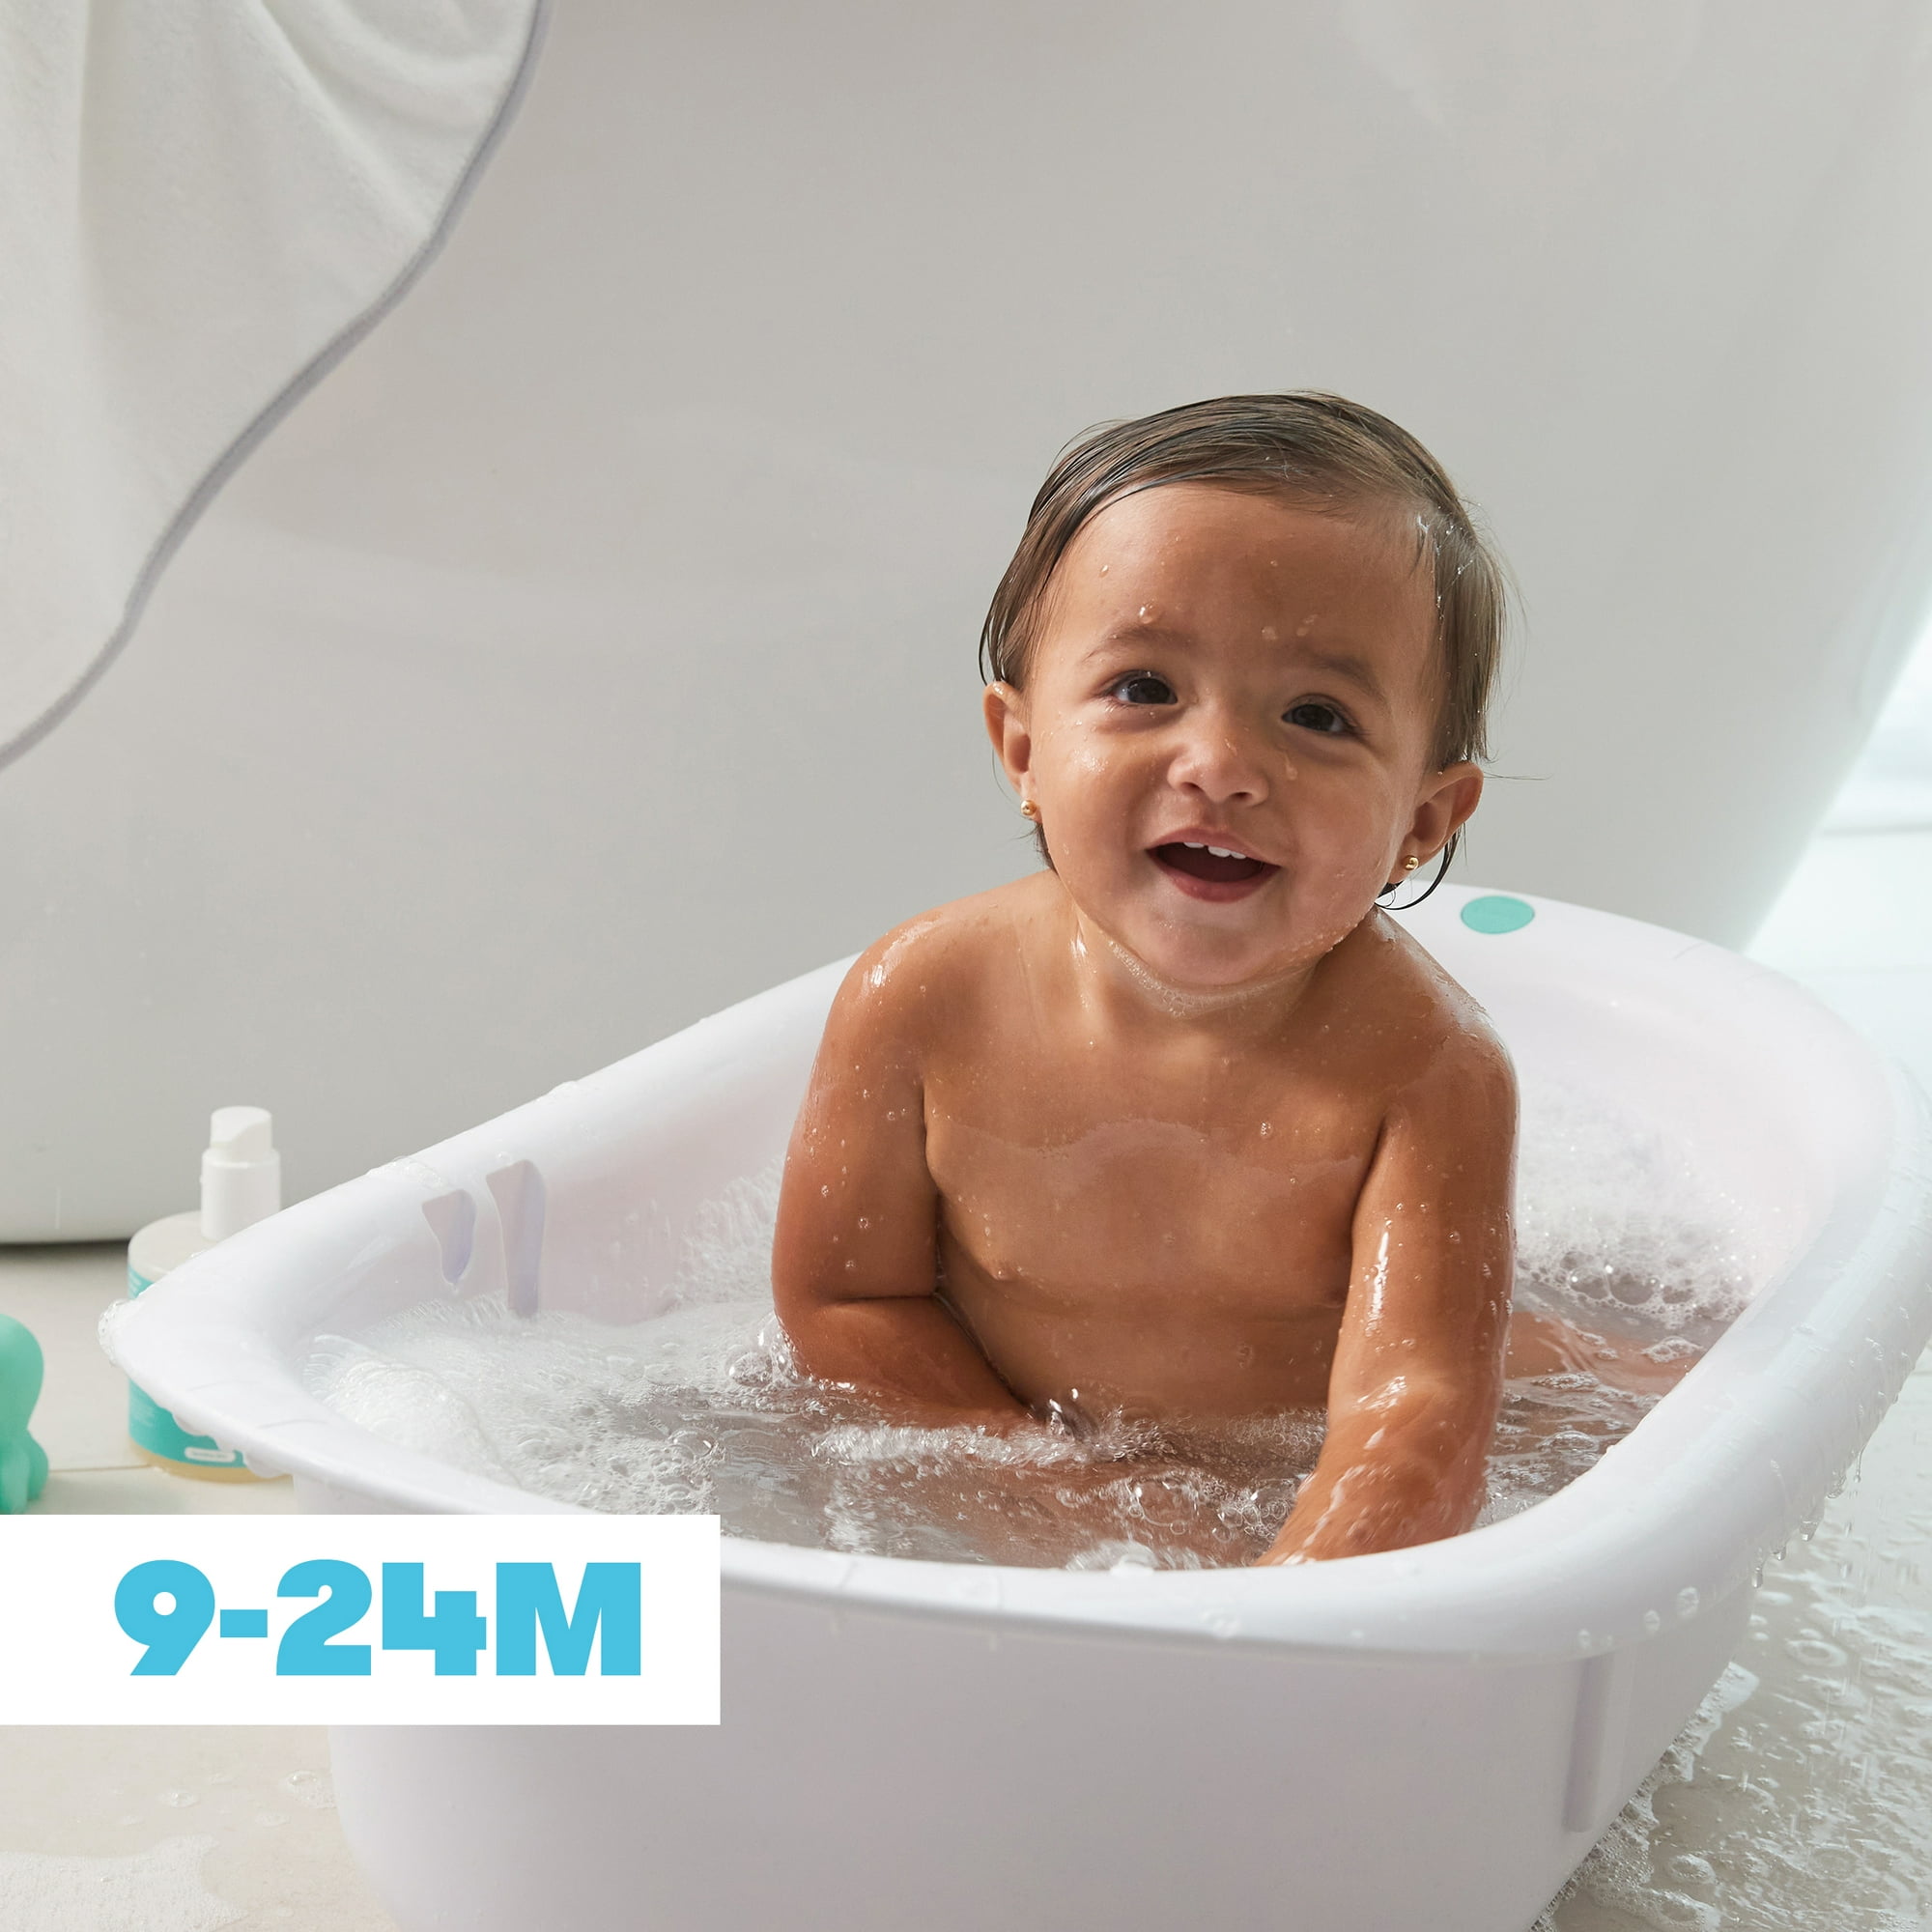 4-in-1 Grow-With-Me Bath Tub by Frida Baby